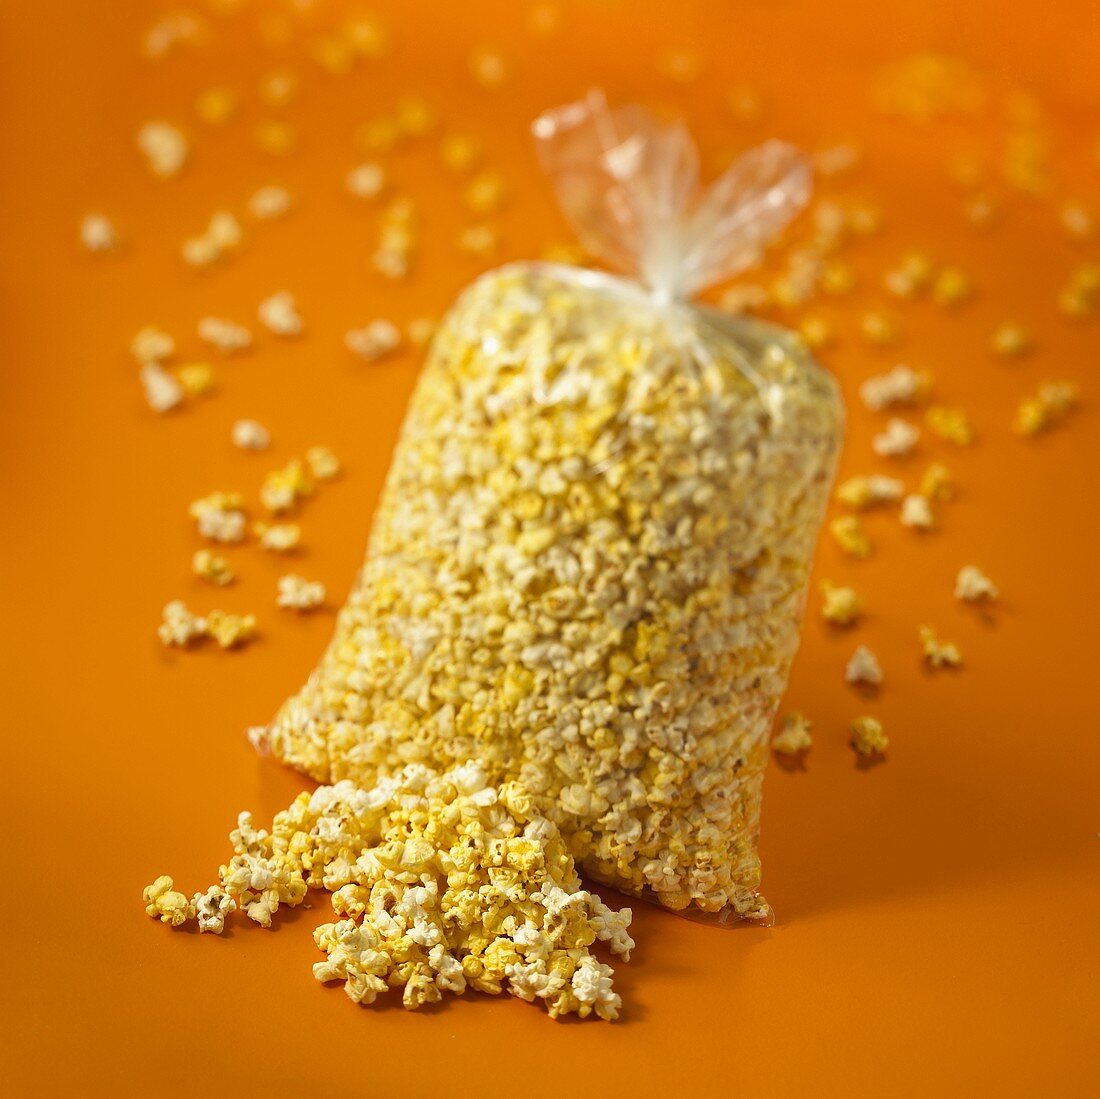 Popcorn in and beside plastic bag